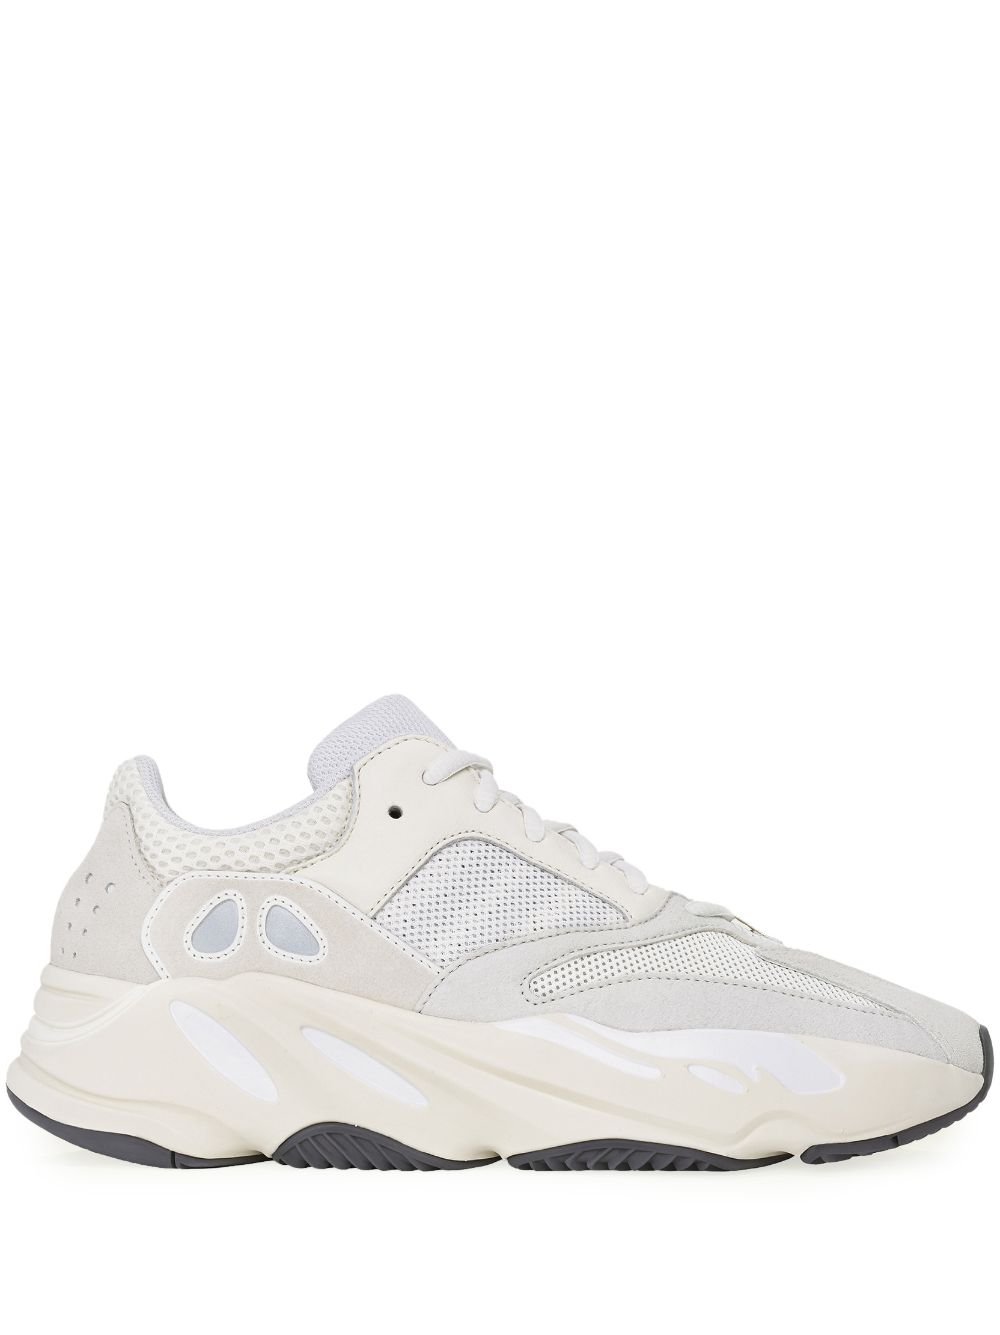 Adidas Originals Yeezy Boost 700 Analog Sneakers In White